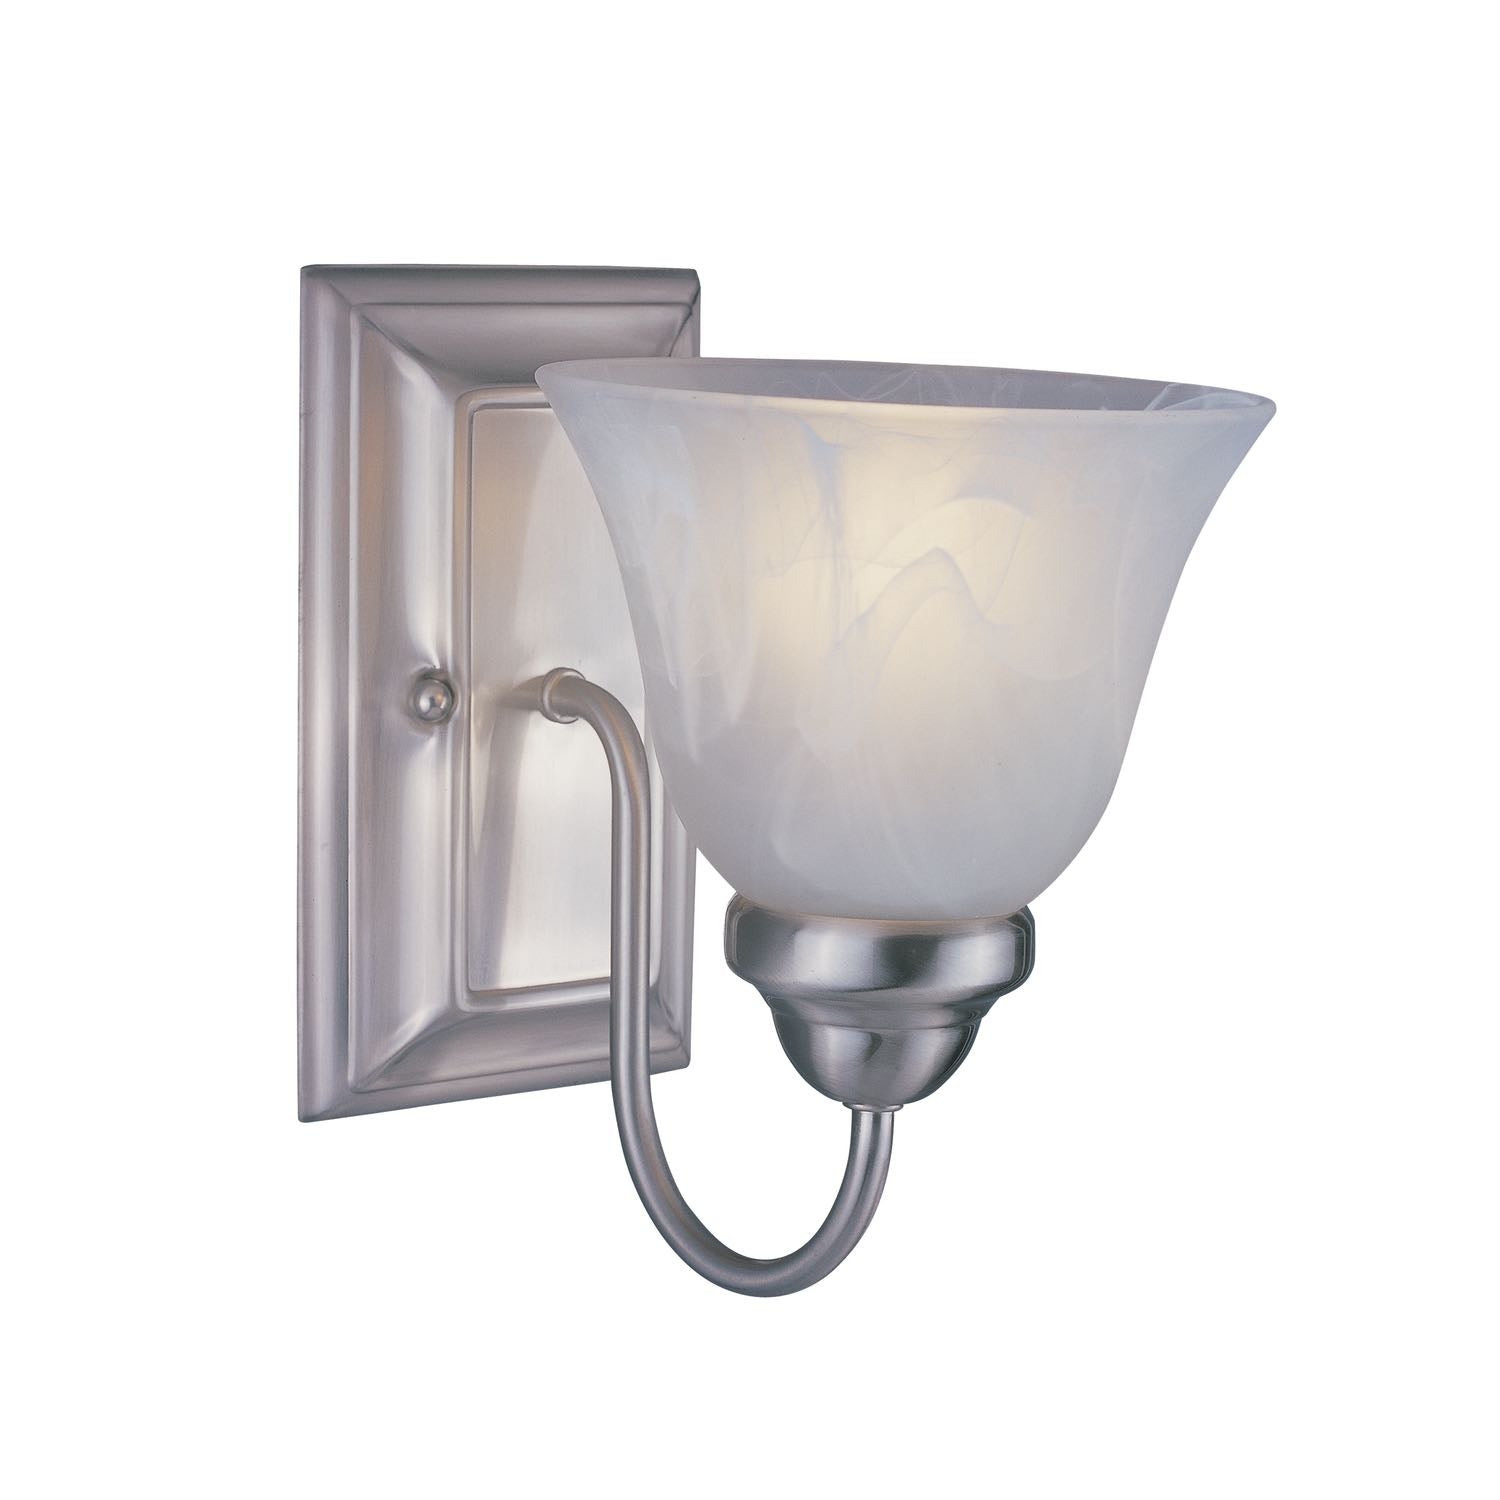 Lexington Wall Sconce Brushed Nickel